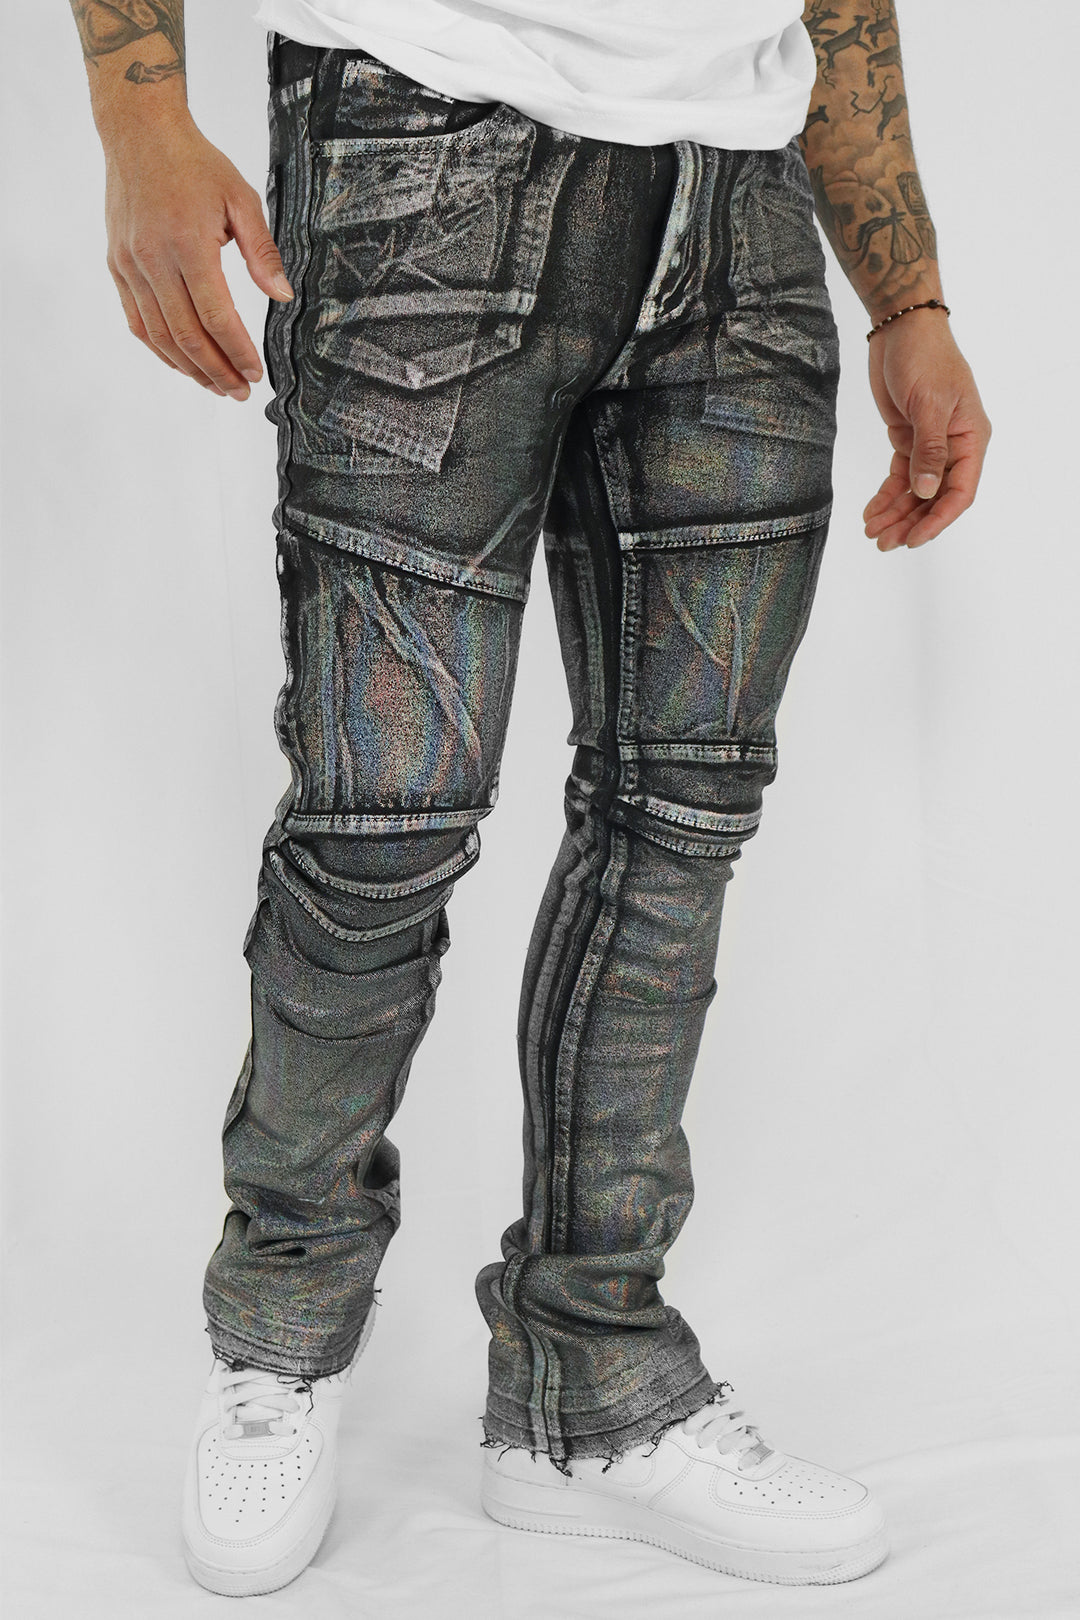 Buy Frayed Super Stacked Jean Men's Jeans & Pants from Majestik